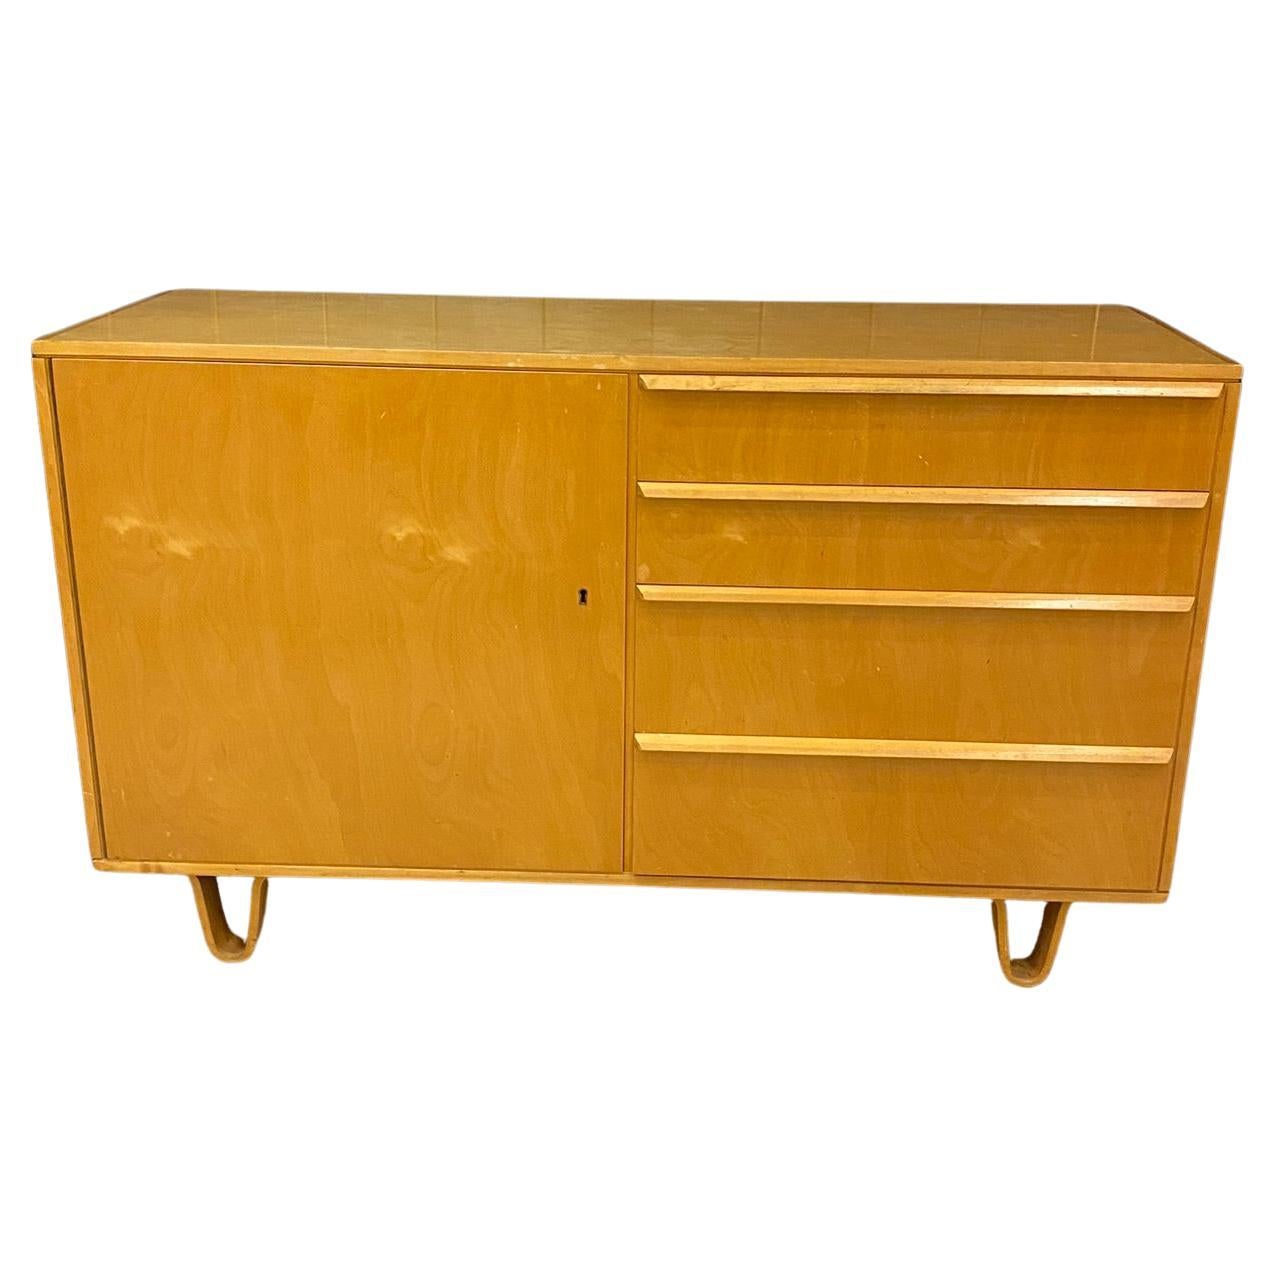 Cees Braackman for Editions Pastoe Small Sideboard, circa 1950 For Sale